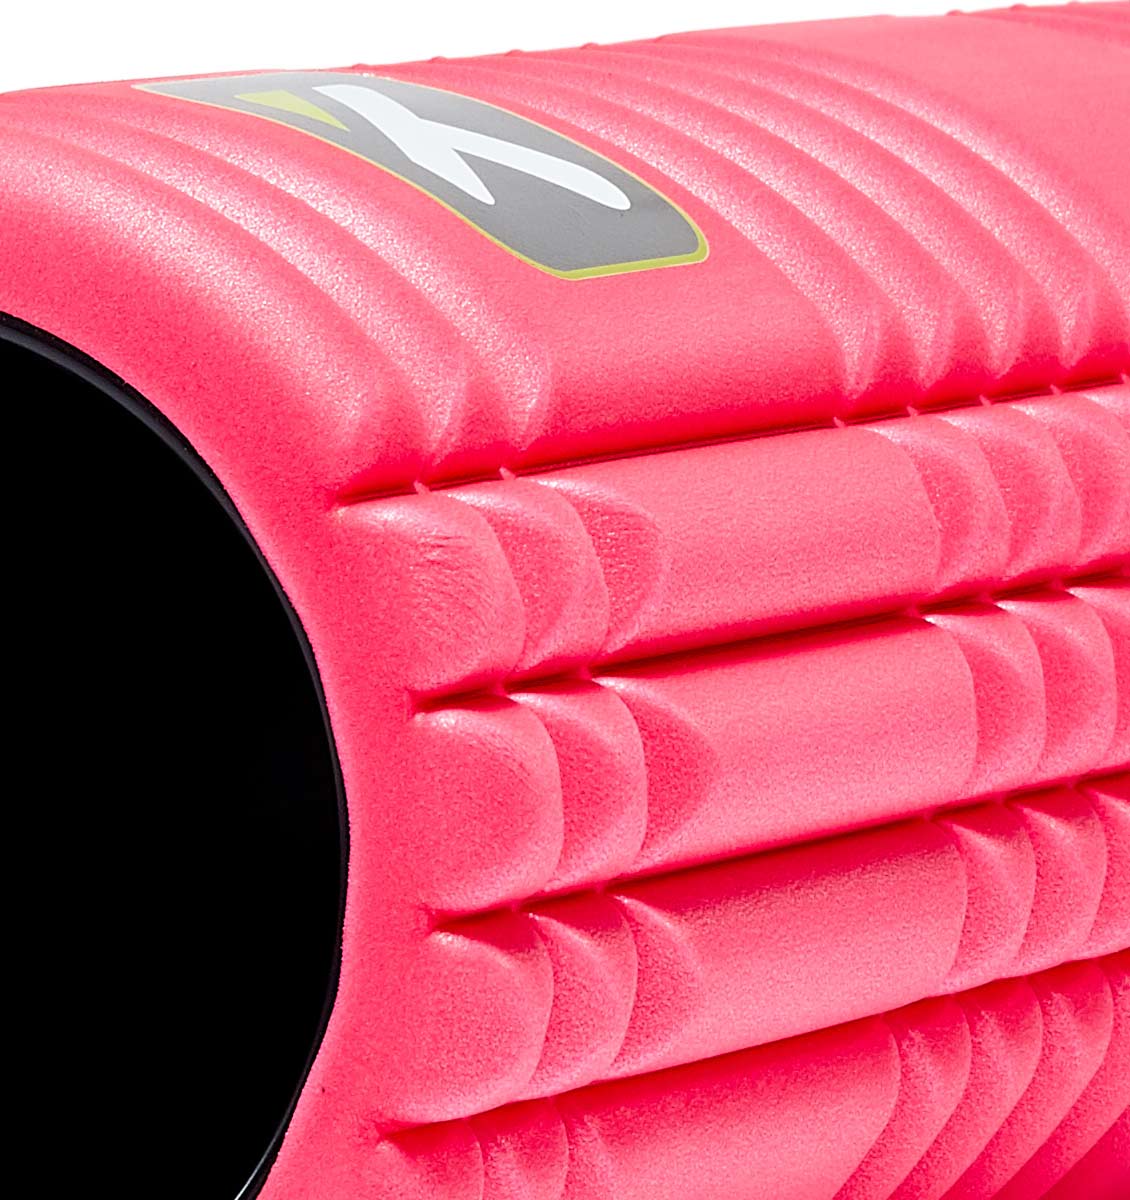 TPT3GRD2PWS0000 TriggerPoint The Grid 2.0 Foam Roller Pink - 45 Degree Angle - Close Up